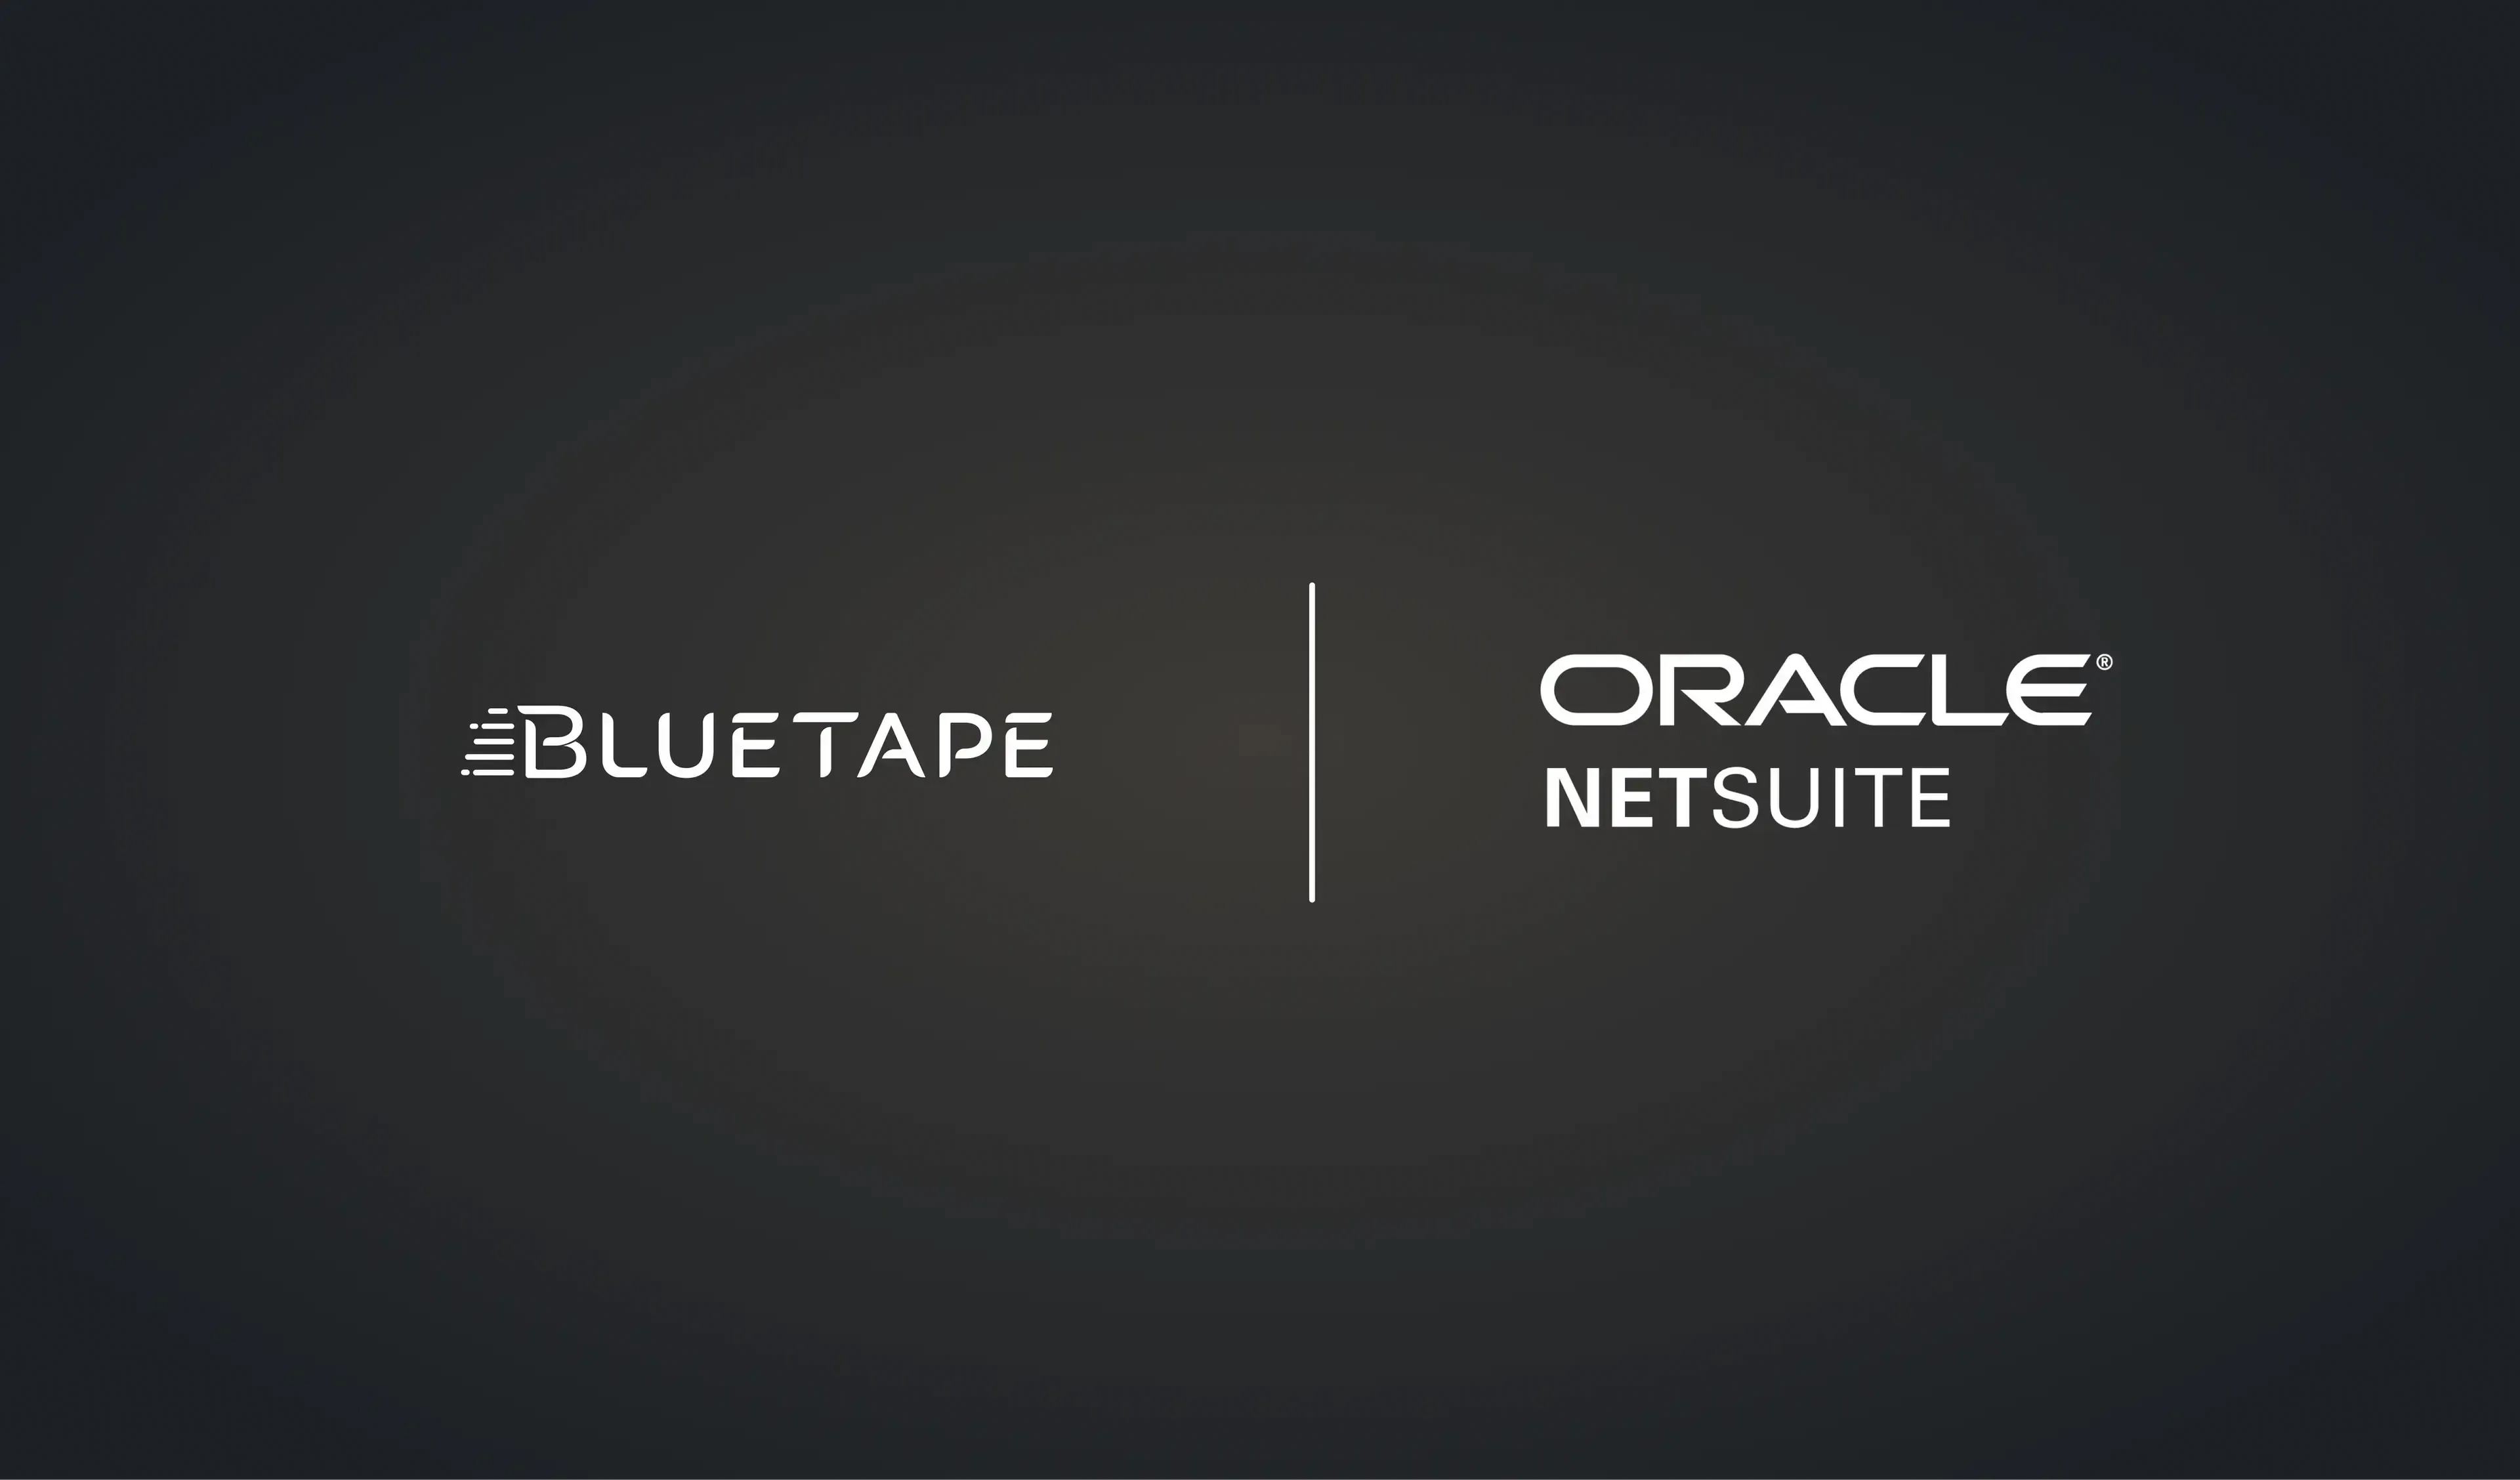 BlueTape integrates with Oracle Netsuite